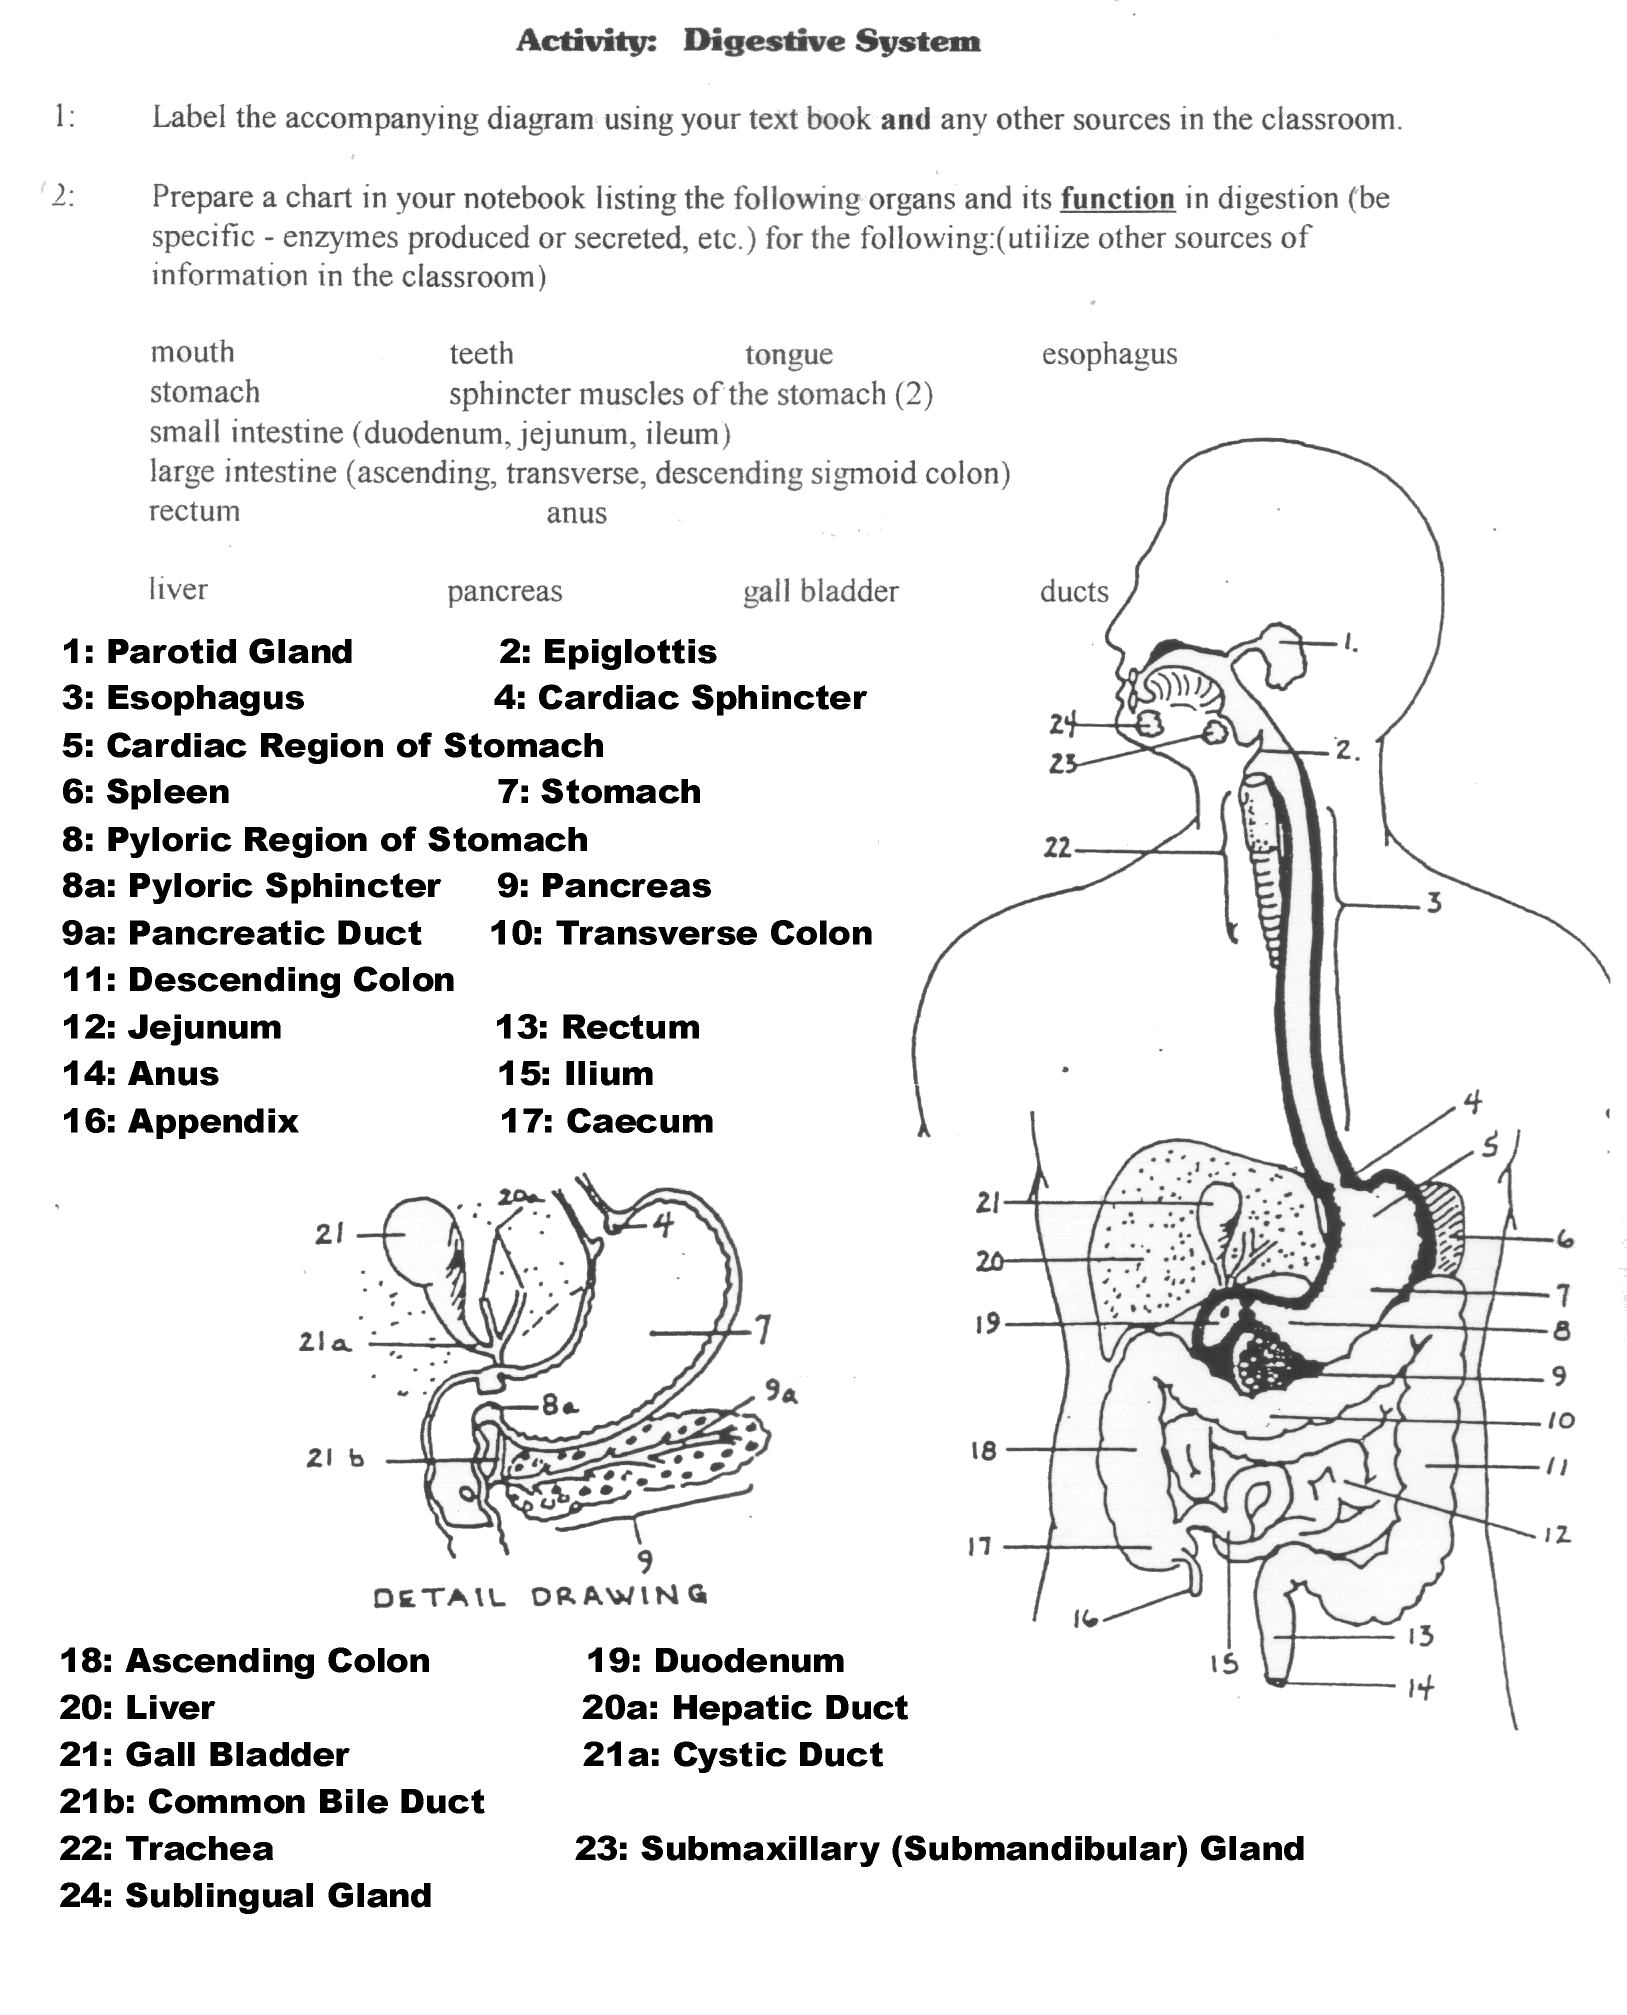 Digestive System Worksheets and Answers